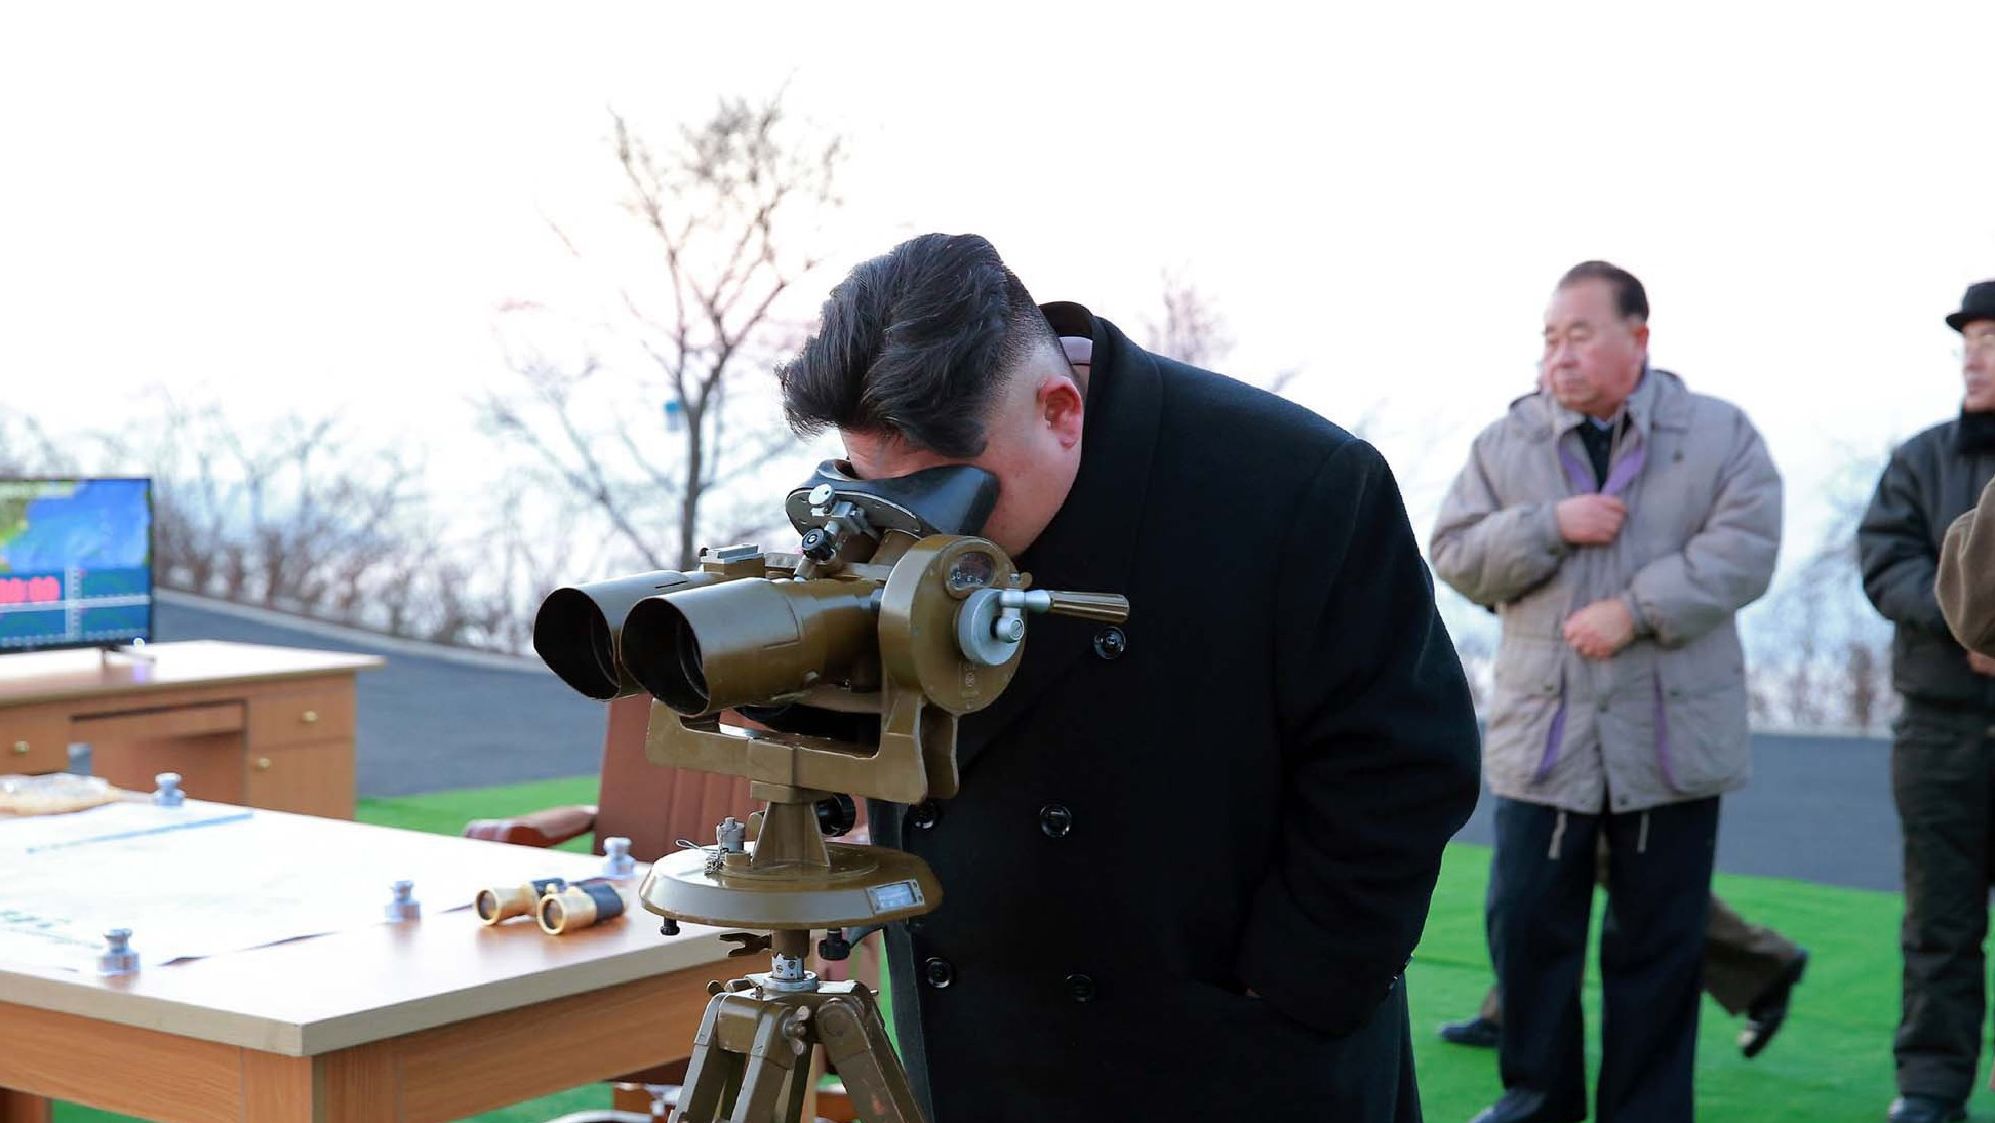 Kim Jong Un oversees a missile test in an image released by North Korean state media. 